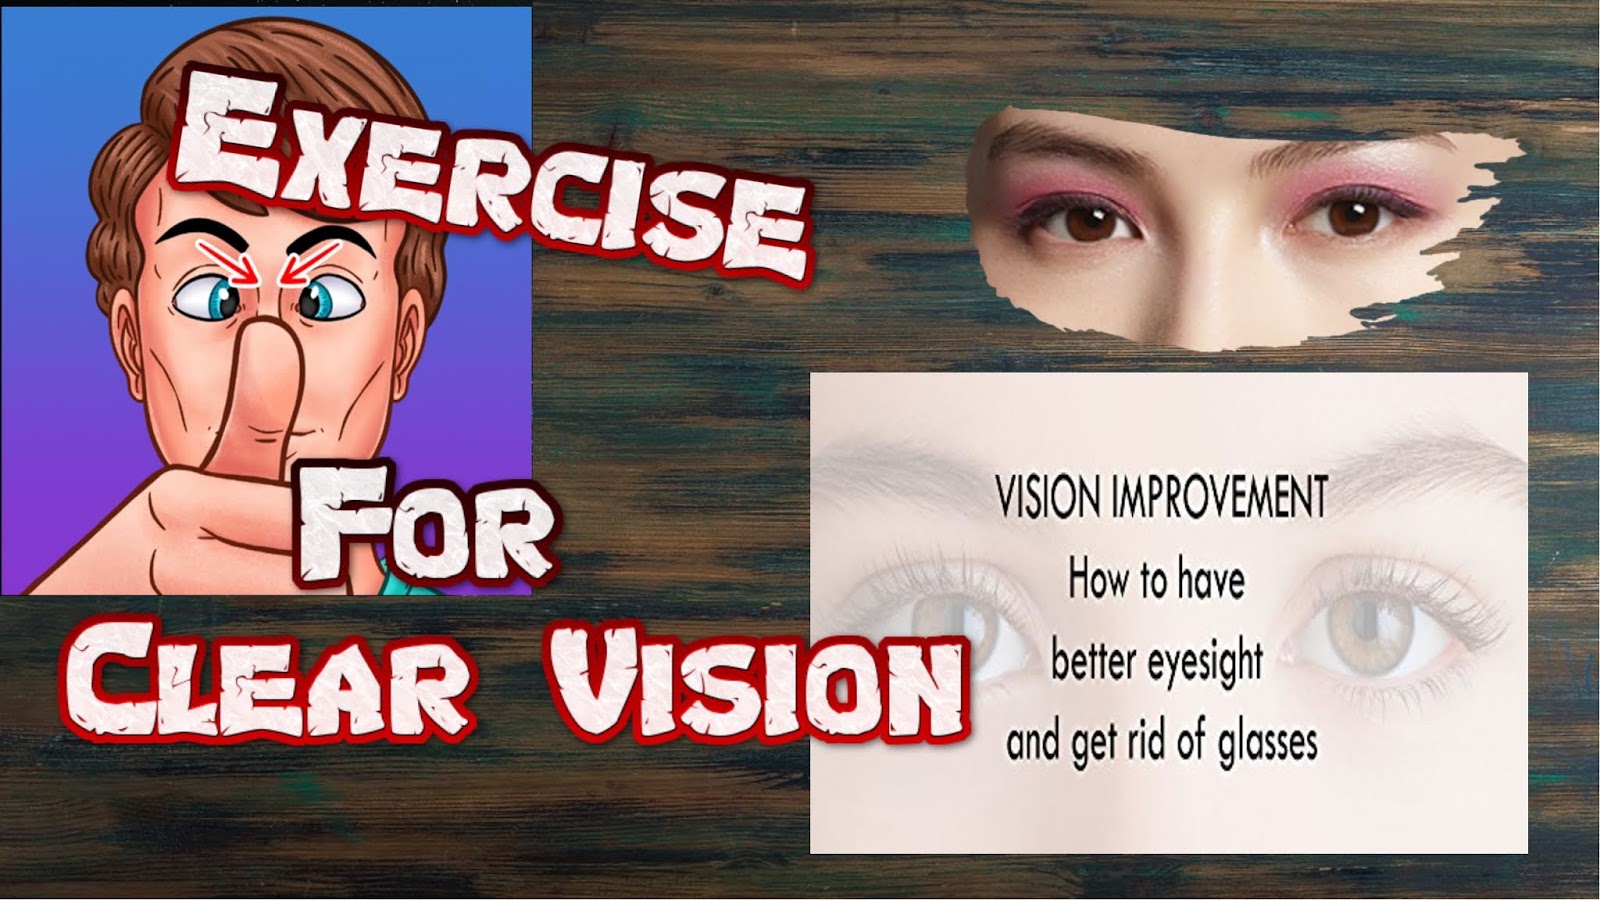 Clear vision 3. Exercises for Eyes. Turn to Clear Vision.